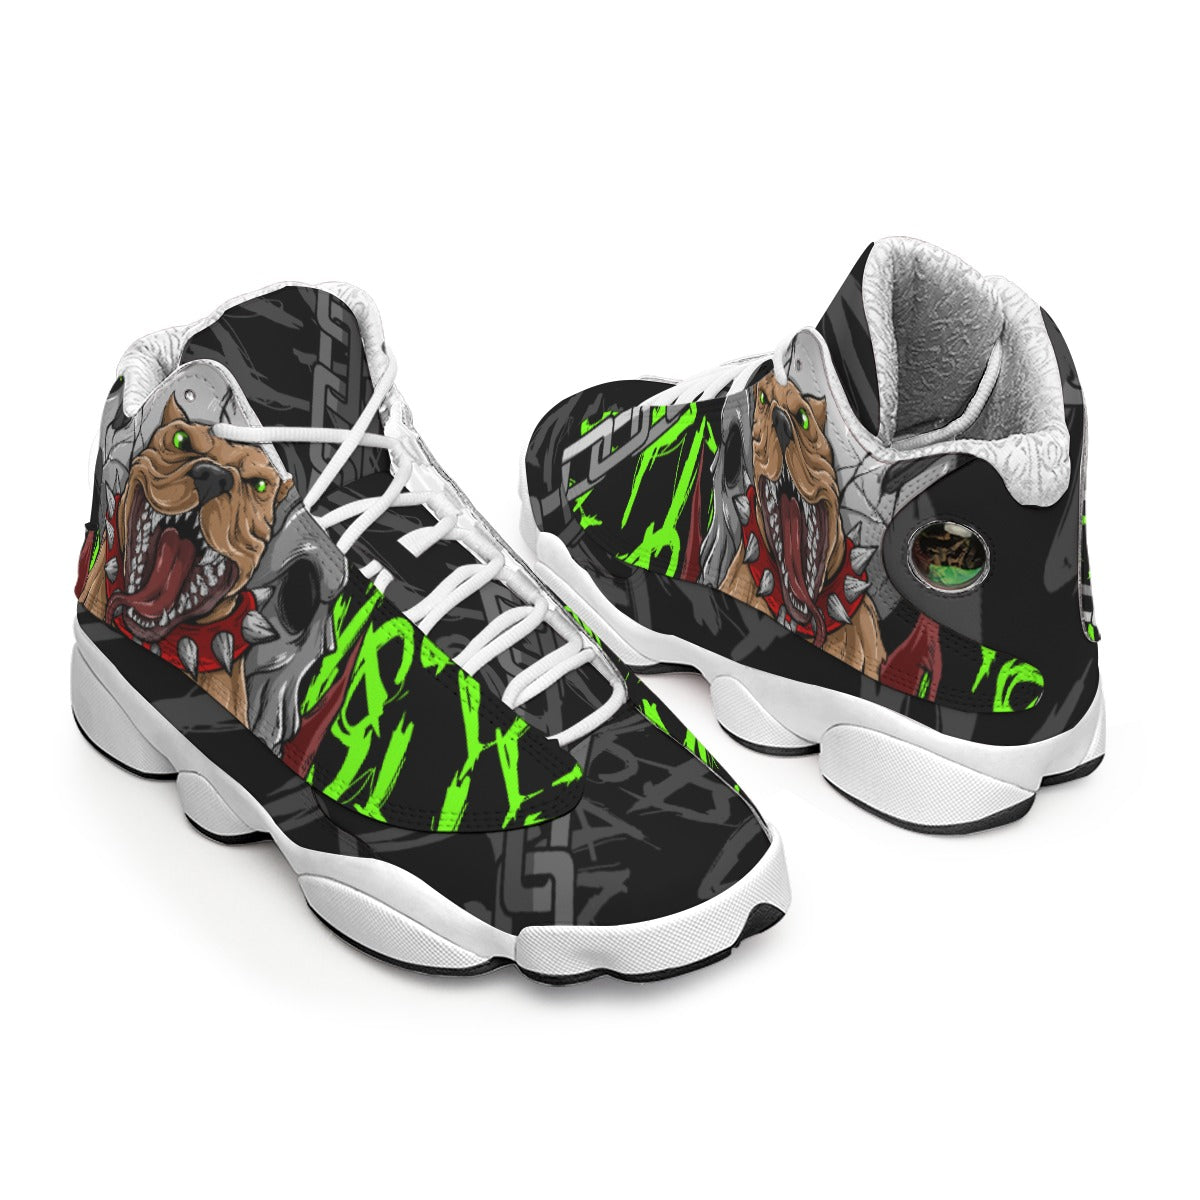 Men's Pitbull Gaming Curved Basketball Shoes